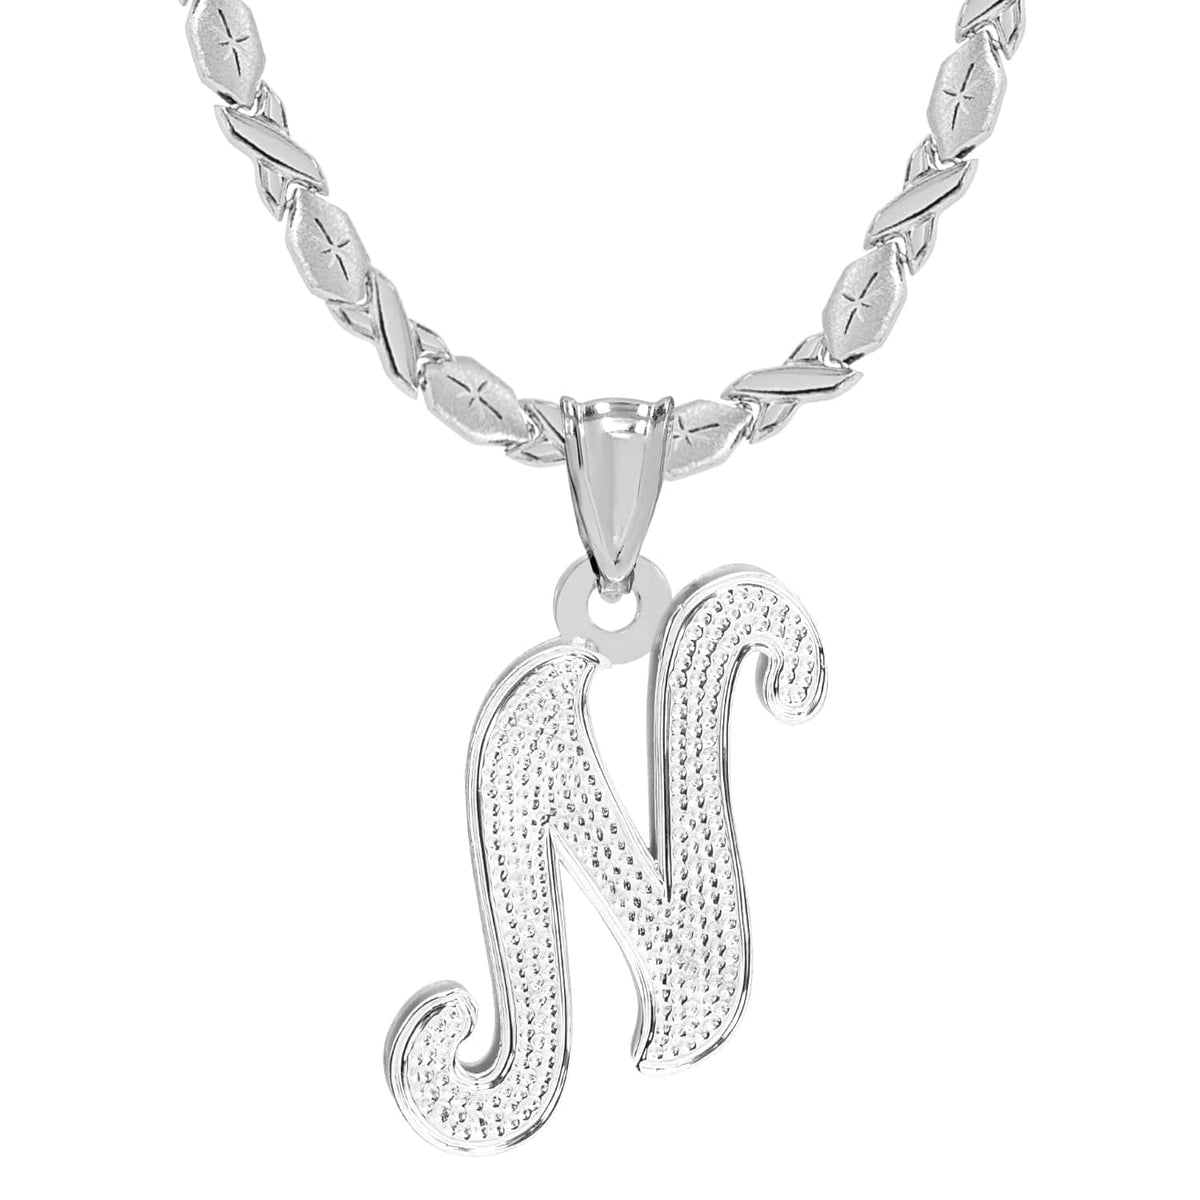 Sterling Silver / Xoxo Chain Initial Necklace - Double Plated with Beaded Finish with Xoxo chain